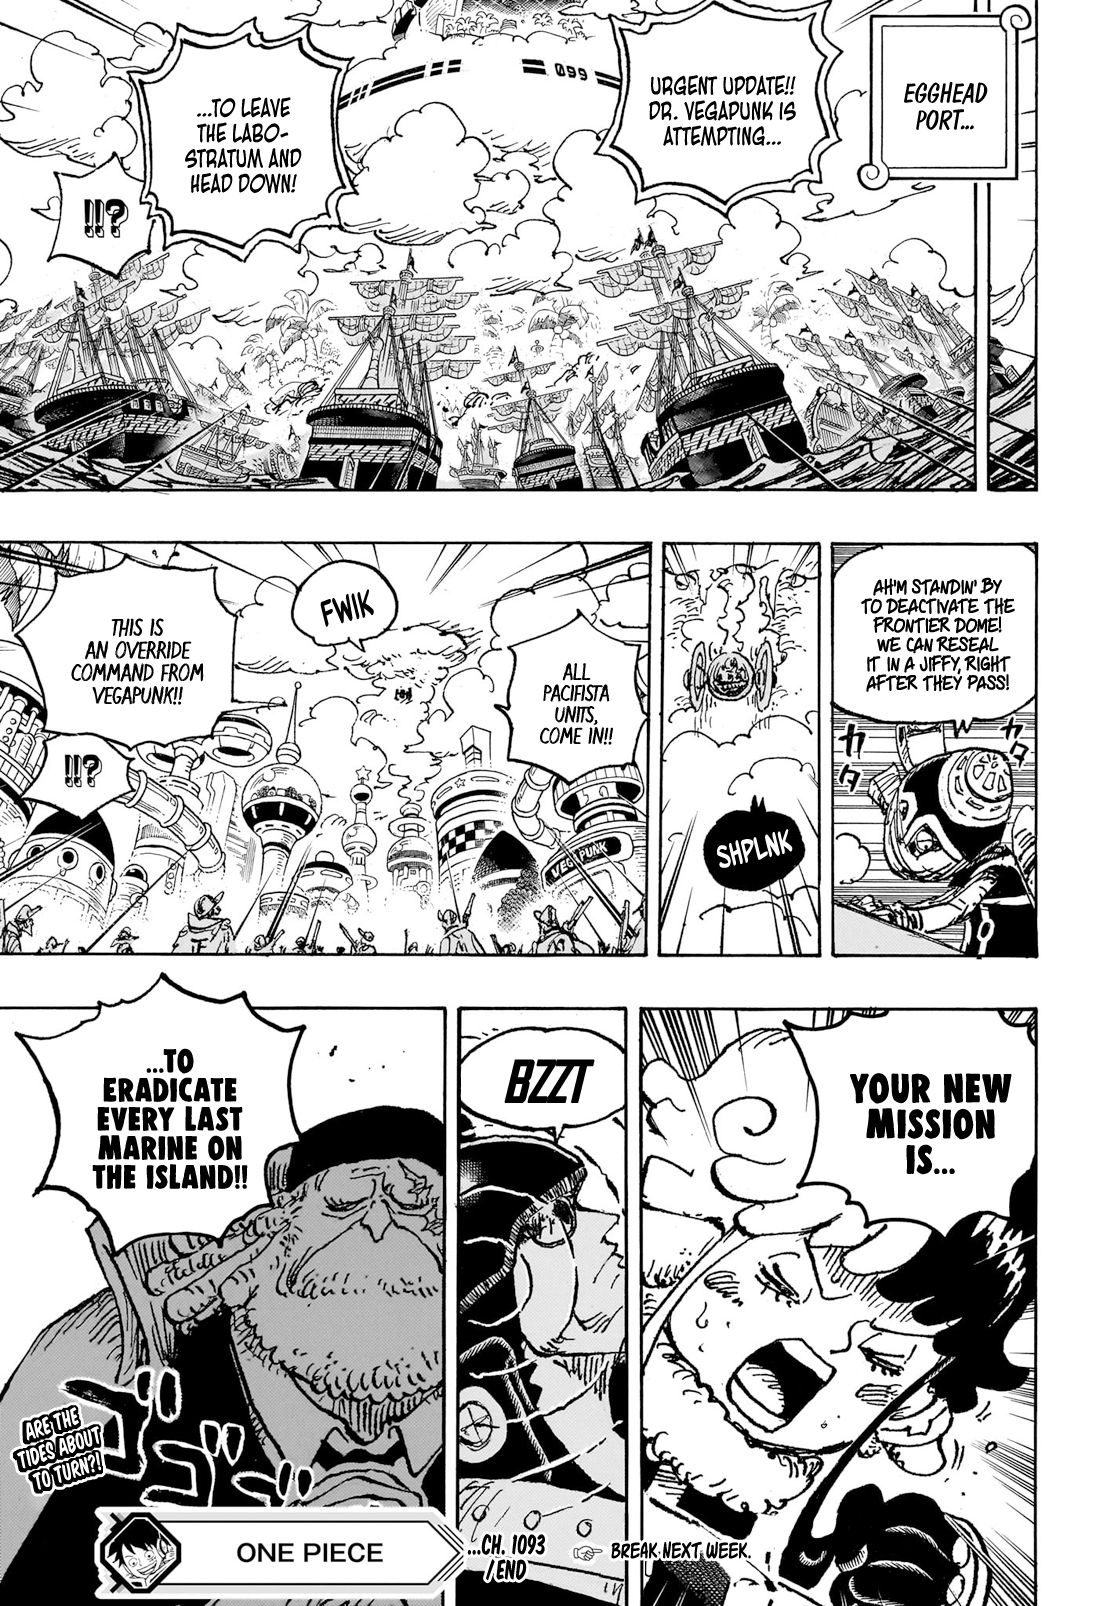 Spoiler - One Piece Chapter 1060 Spoilers Discussion, Page 486